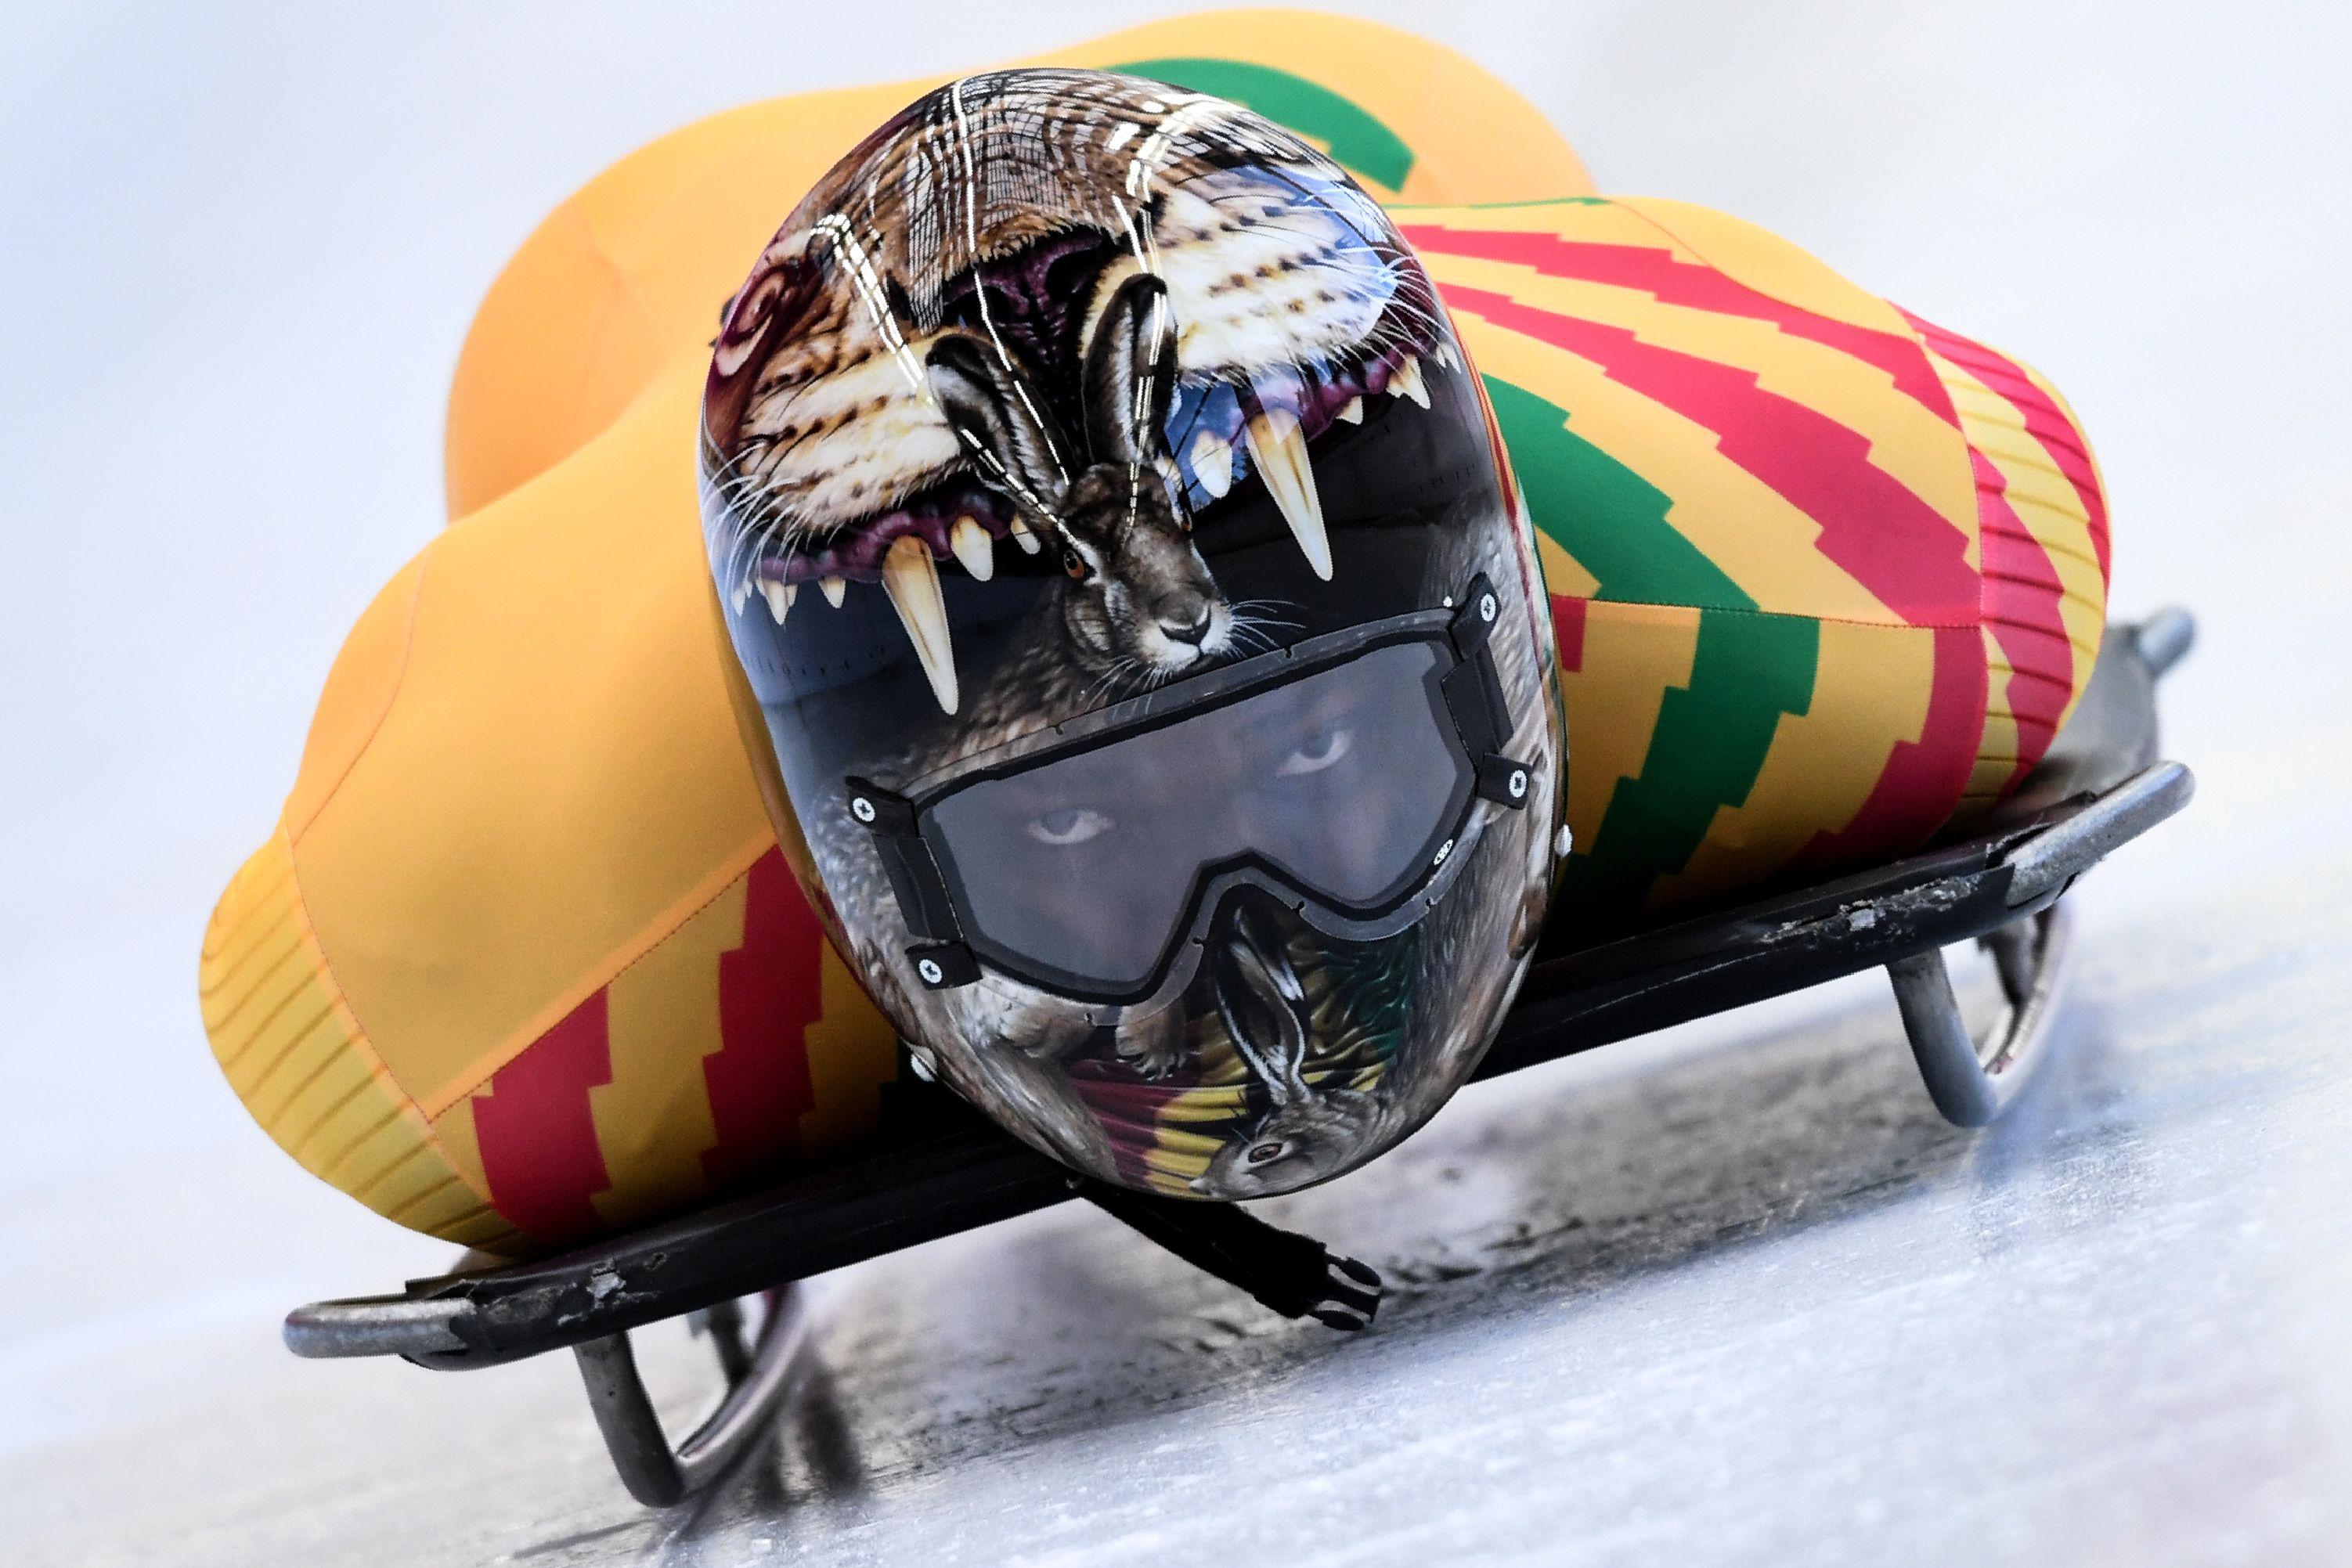 TOPSHOT - Ghana's Akwasi Frimpong takes part in a training session for the men's skeleton event at the Olympic Sliding Centre, during the Pyeongchang 2018 Winter Olympic Games in Pyeongchang, on February 11, 2018.

 / AFP PHOTO / Kirill KUDRYAVTSEV        (Photo credit should read KIRILL KUDRYAVTSEV/AFP/Getty Images)